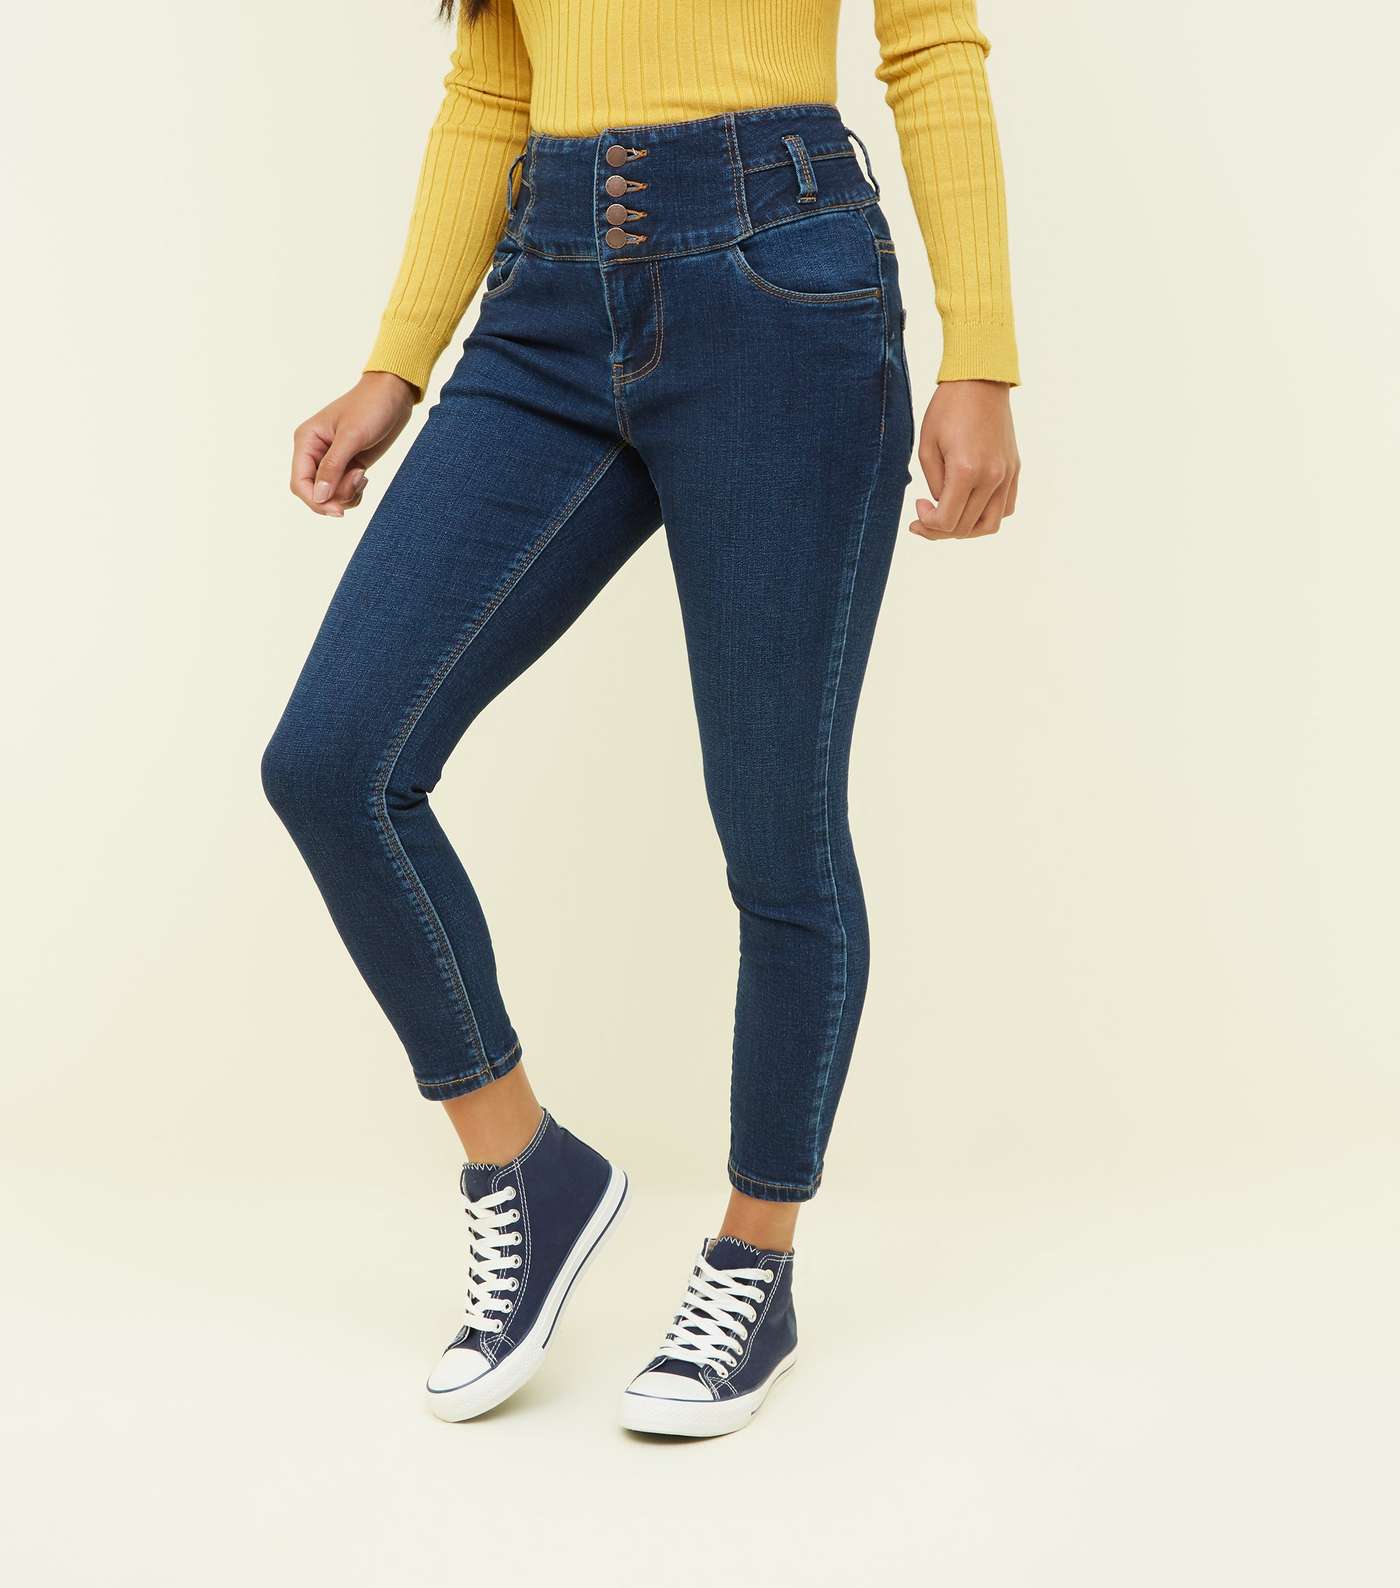 Petite Blue 26in High Waist Skinny Jeans Image 2